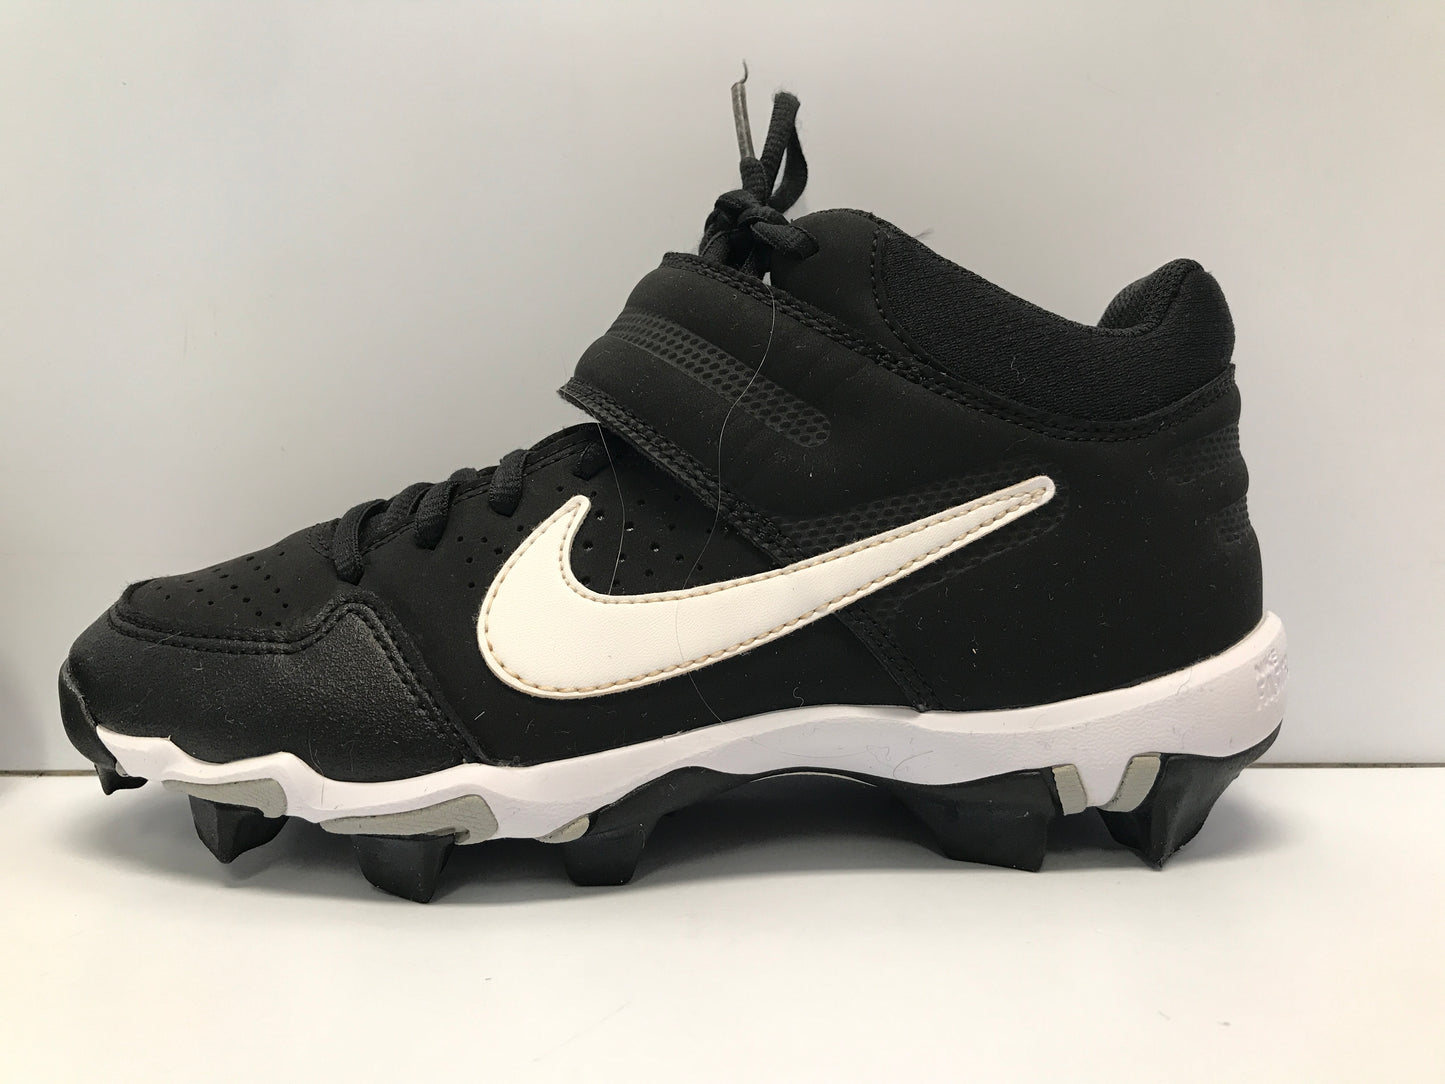 Baseball Shoes Cleats Child Size 4 Nike Fastflex Black White High Top Excellent